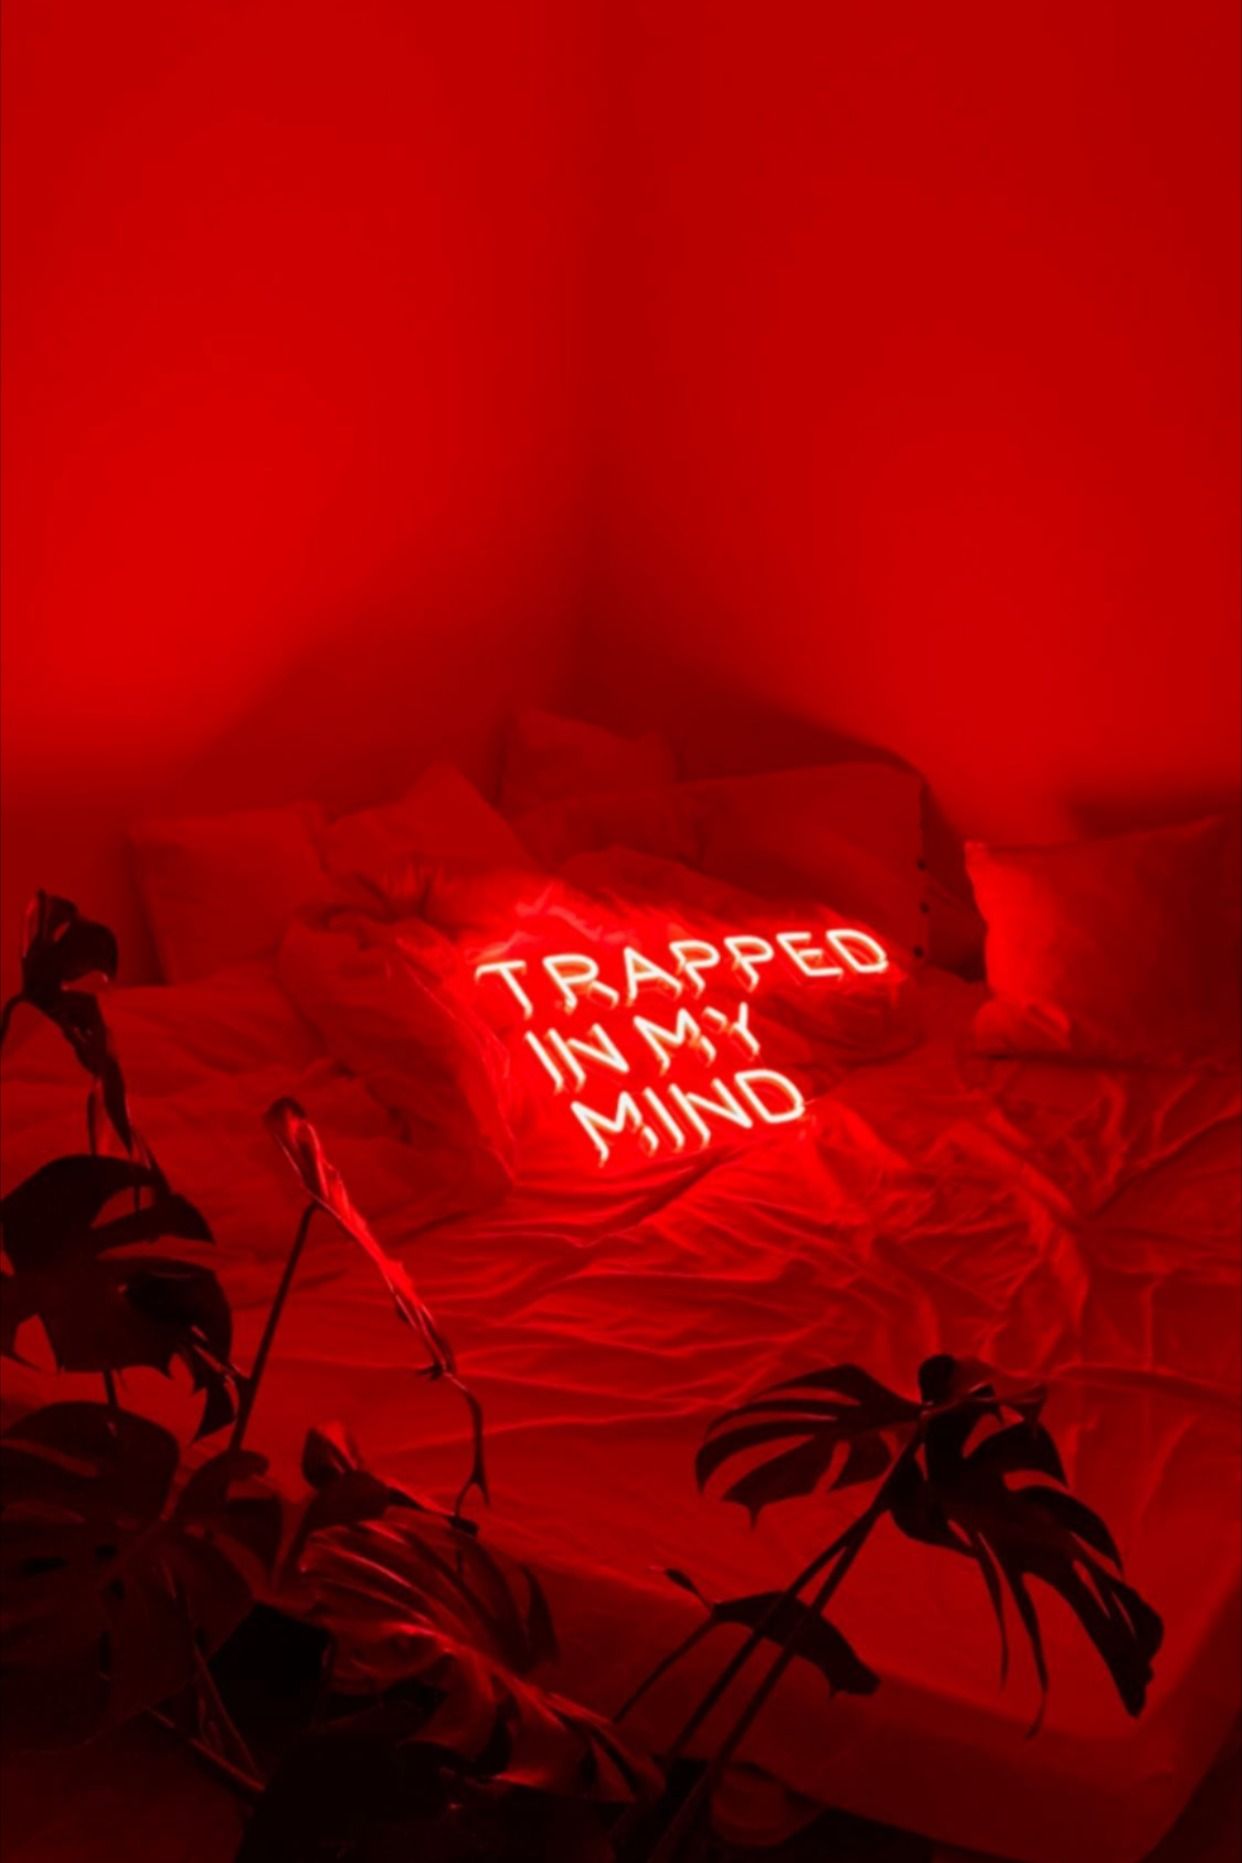 Red Aesthetic Neon Wallpapers